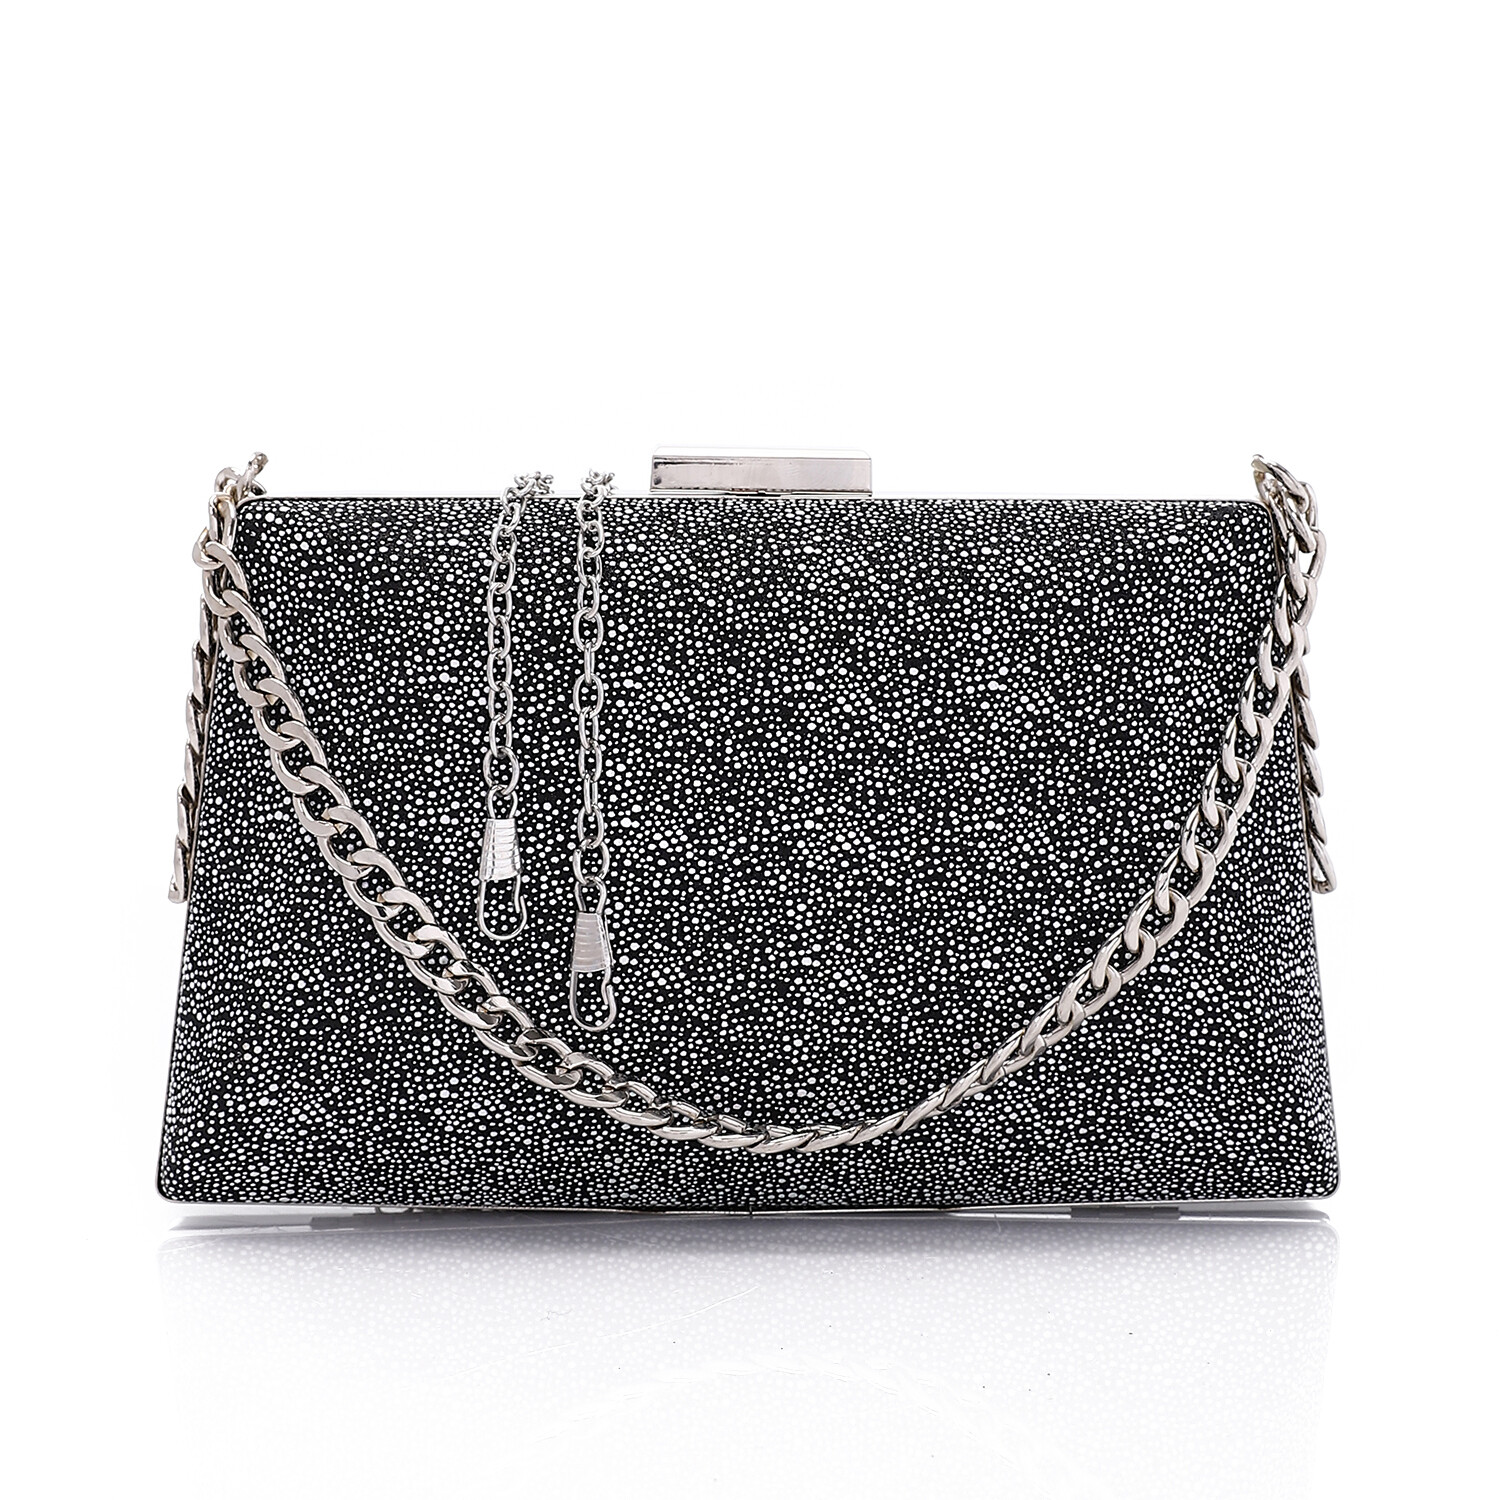 One Main Compartment Synthetic Glittery Clutch - Black 4993